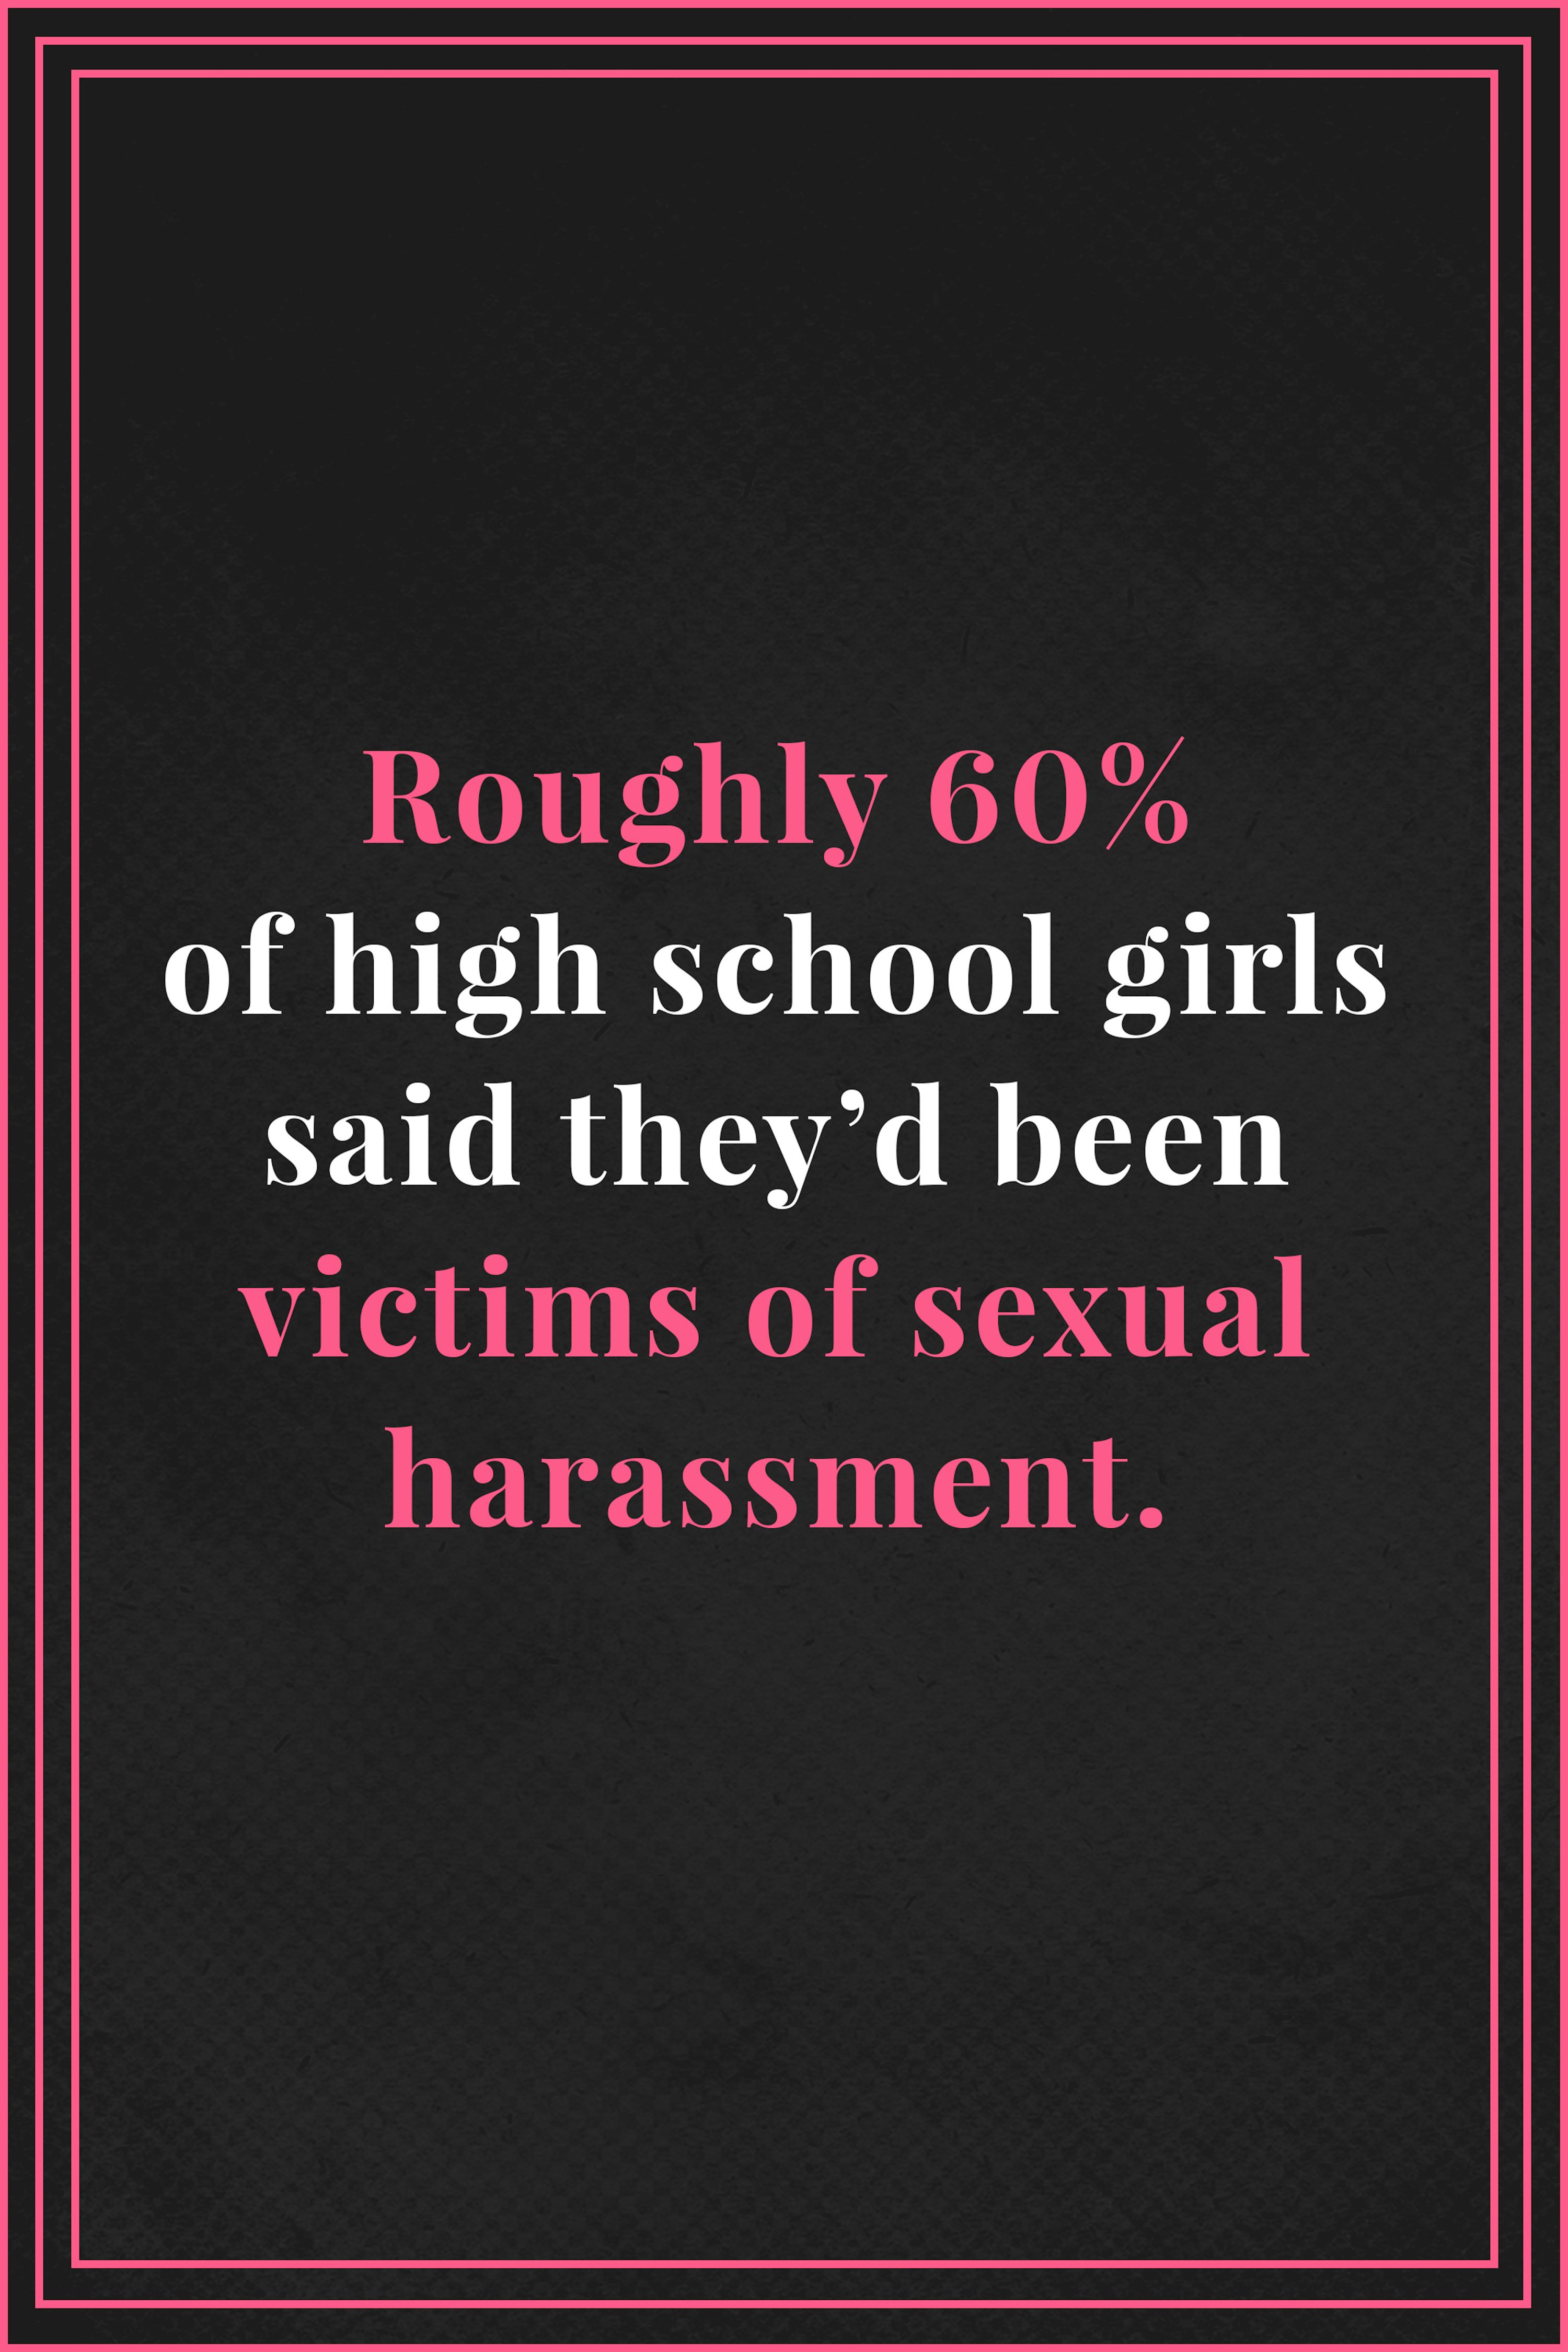 School Gril Choda - Sexual Harassment in School - Real Girls Share Experiences Of Sexual  Assault in School